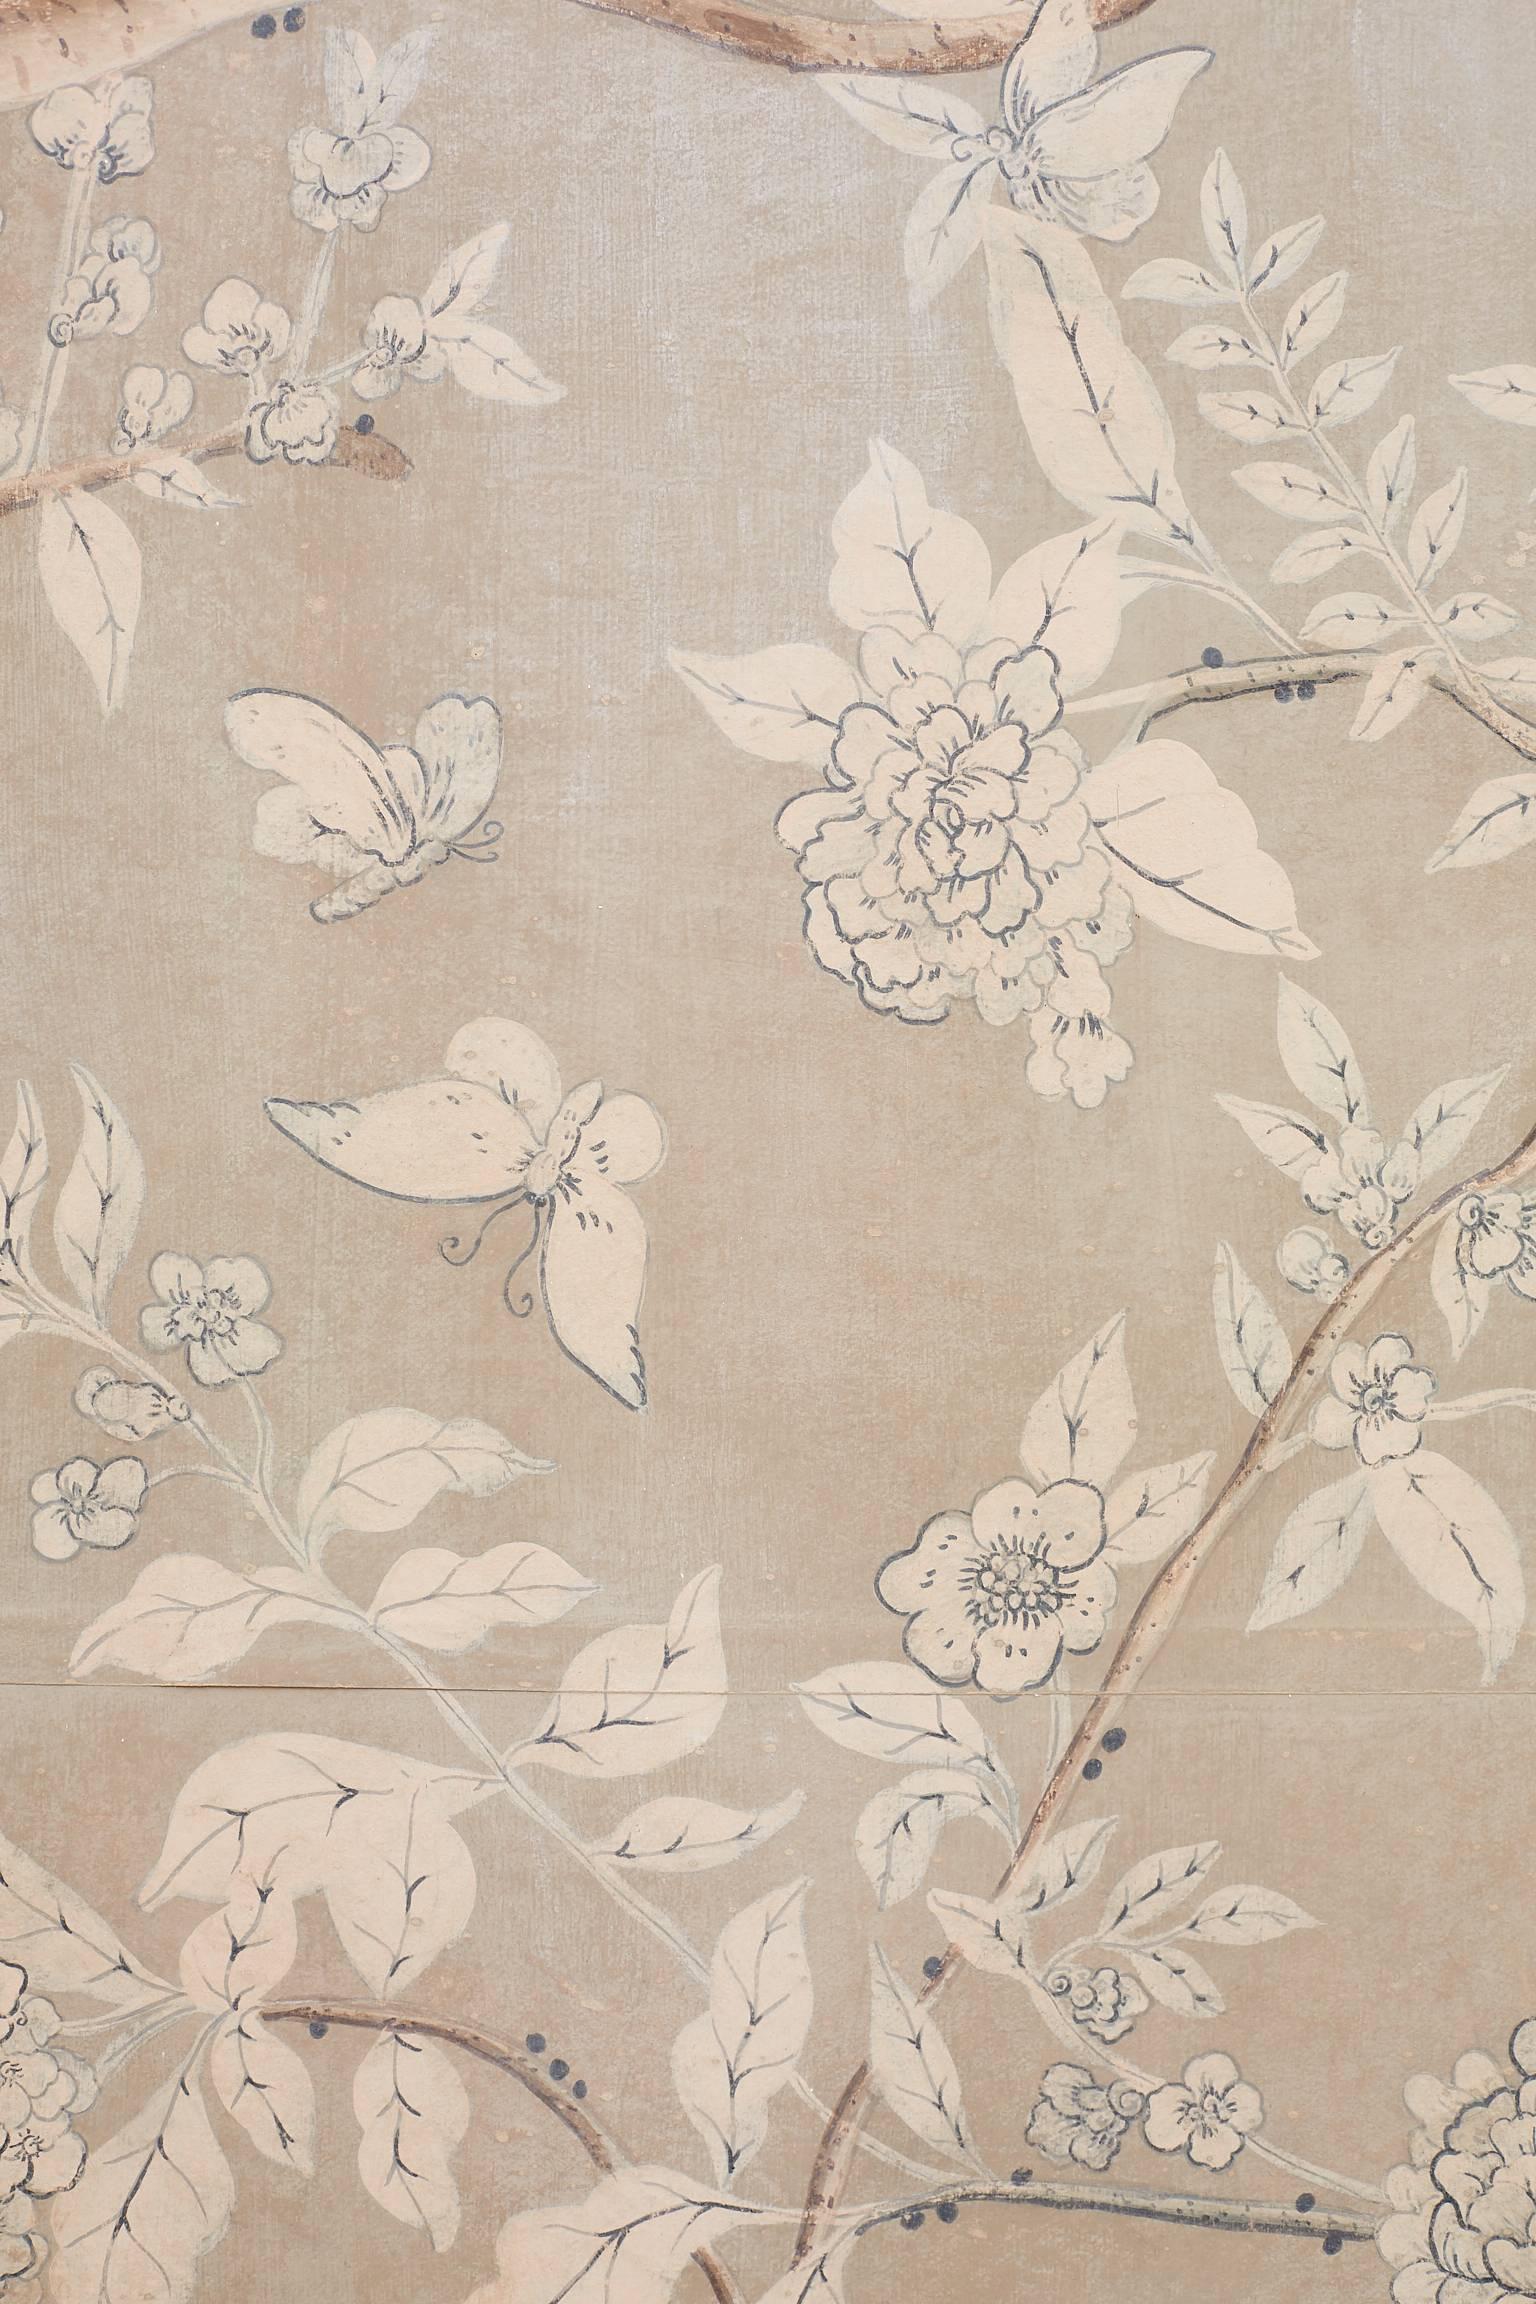 Monumental Chinoiserie Wallpaper Panels by Dennis and Leen 3